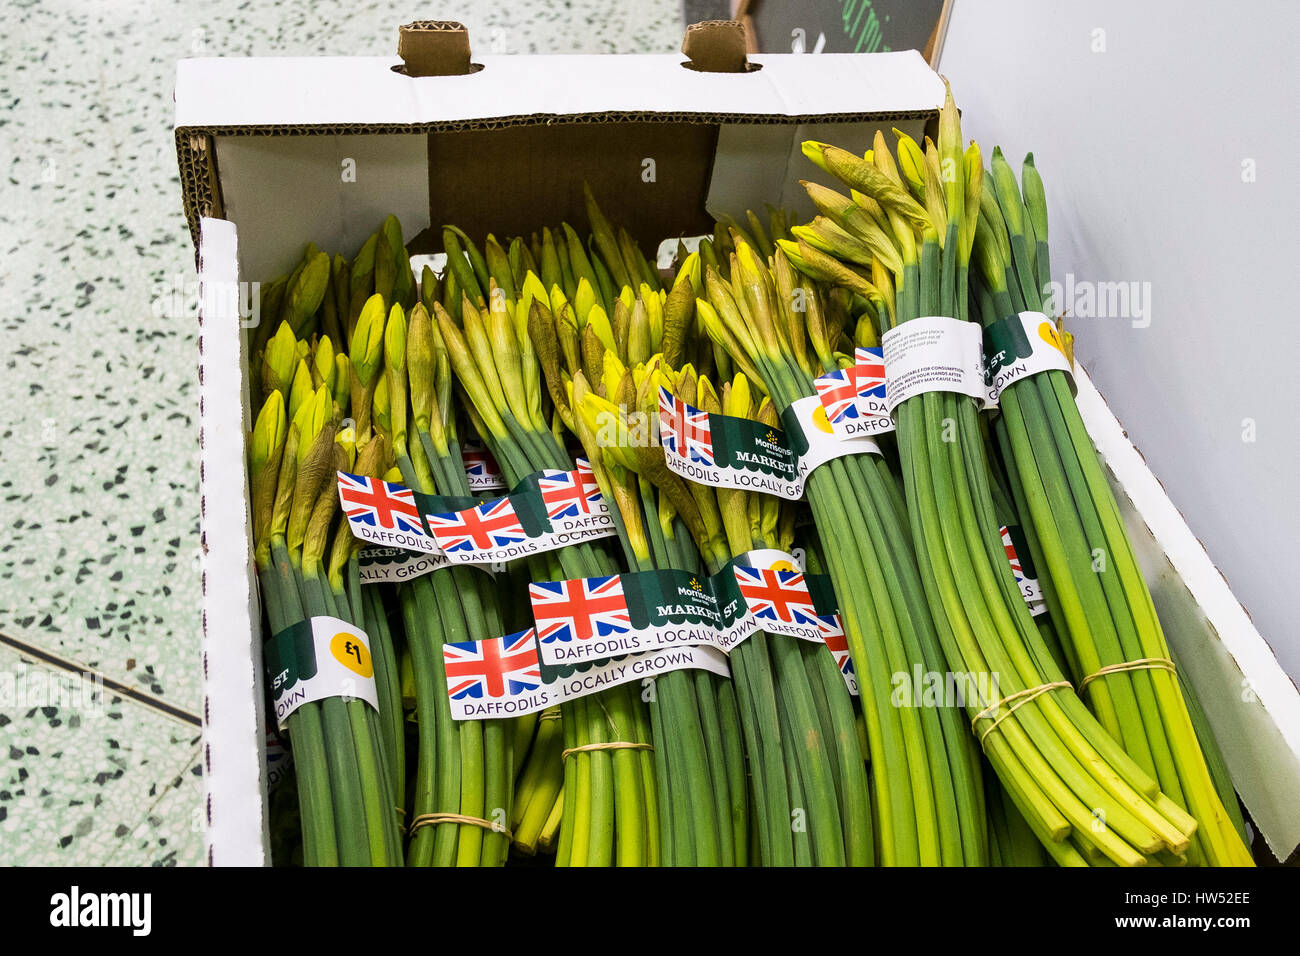 Morrisons Interior Supermarket Daffodils Bunches Box Flowers Sale Stock Photo